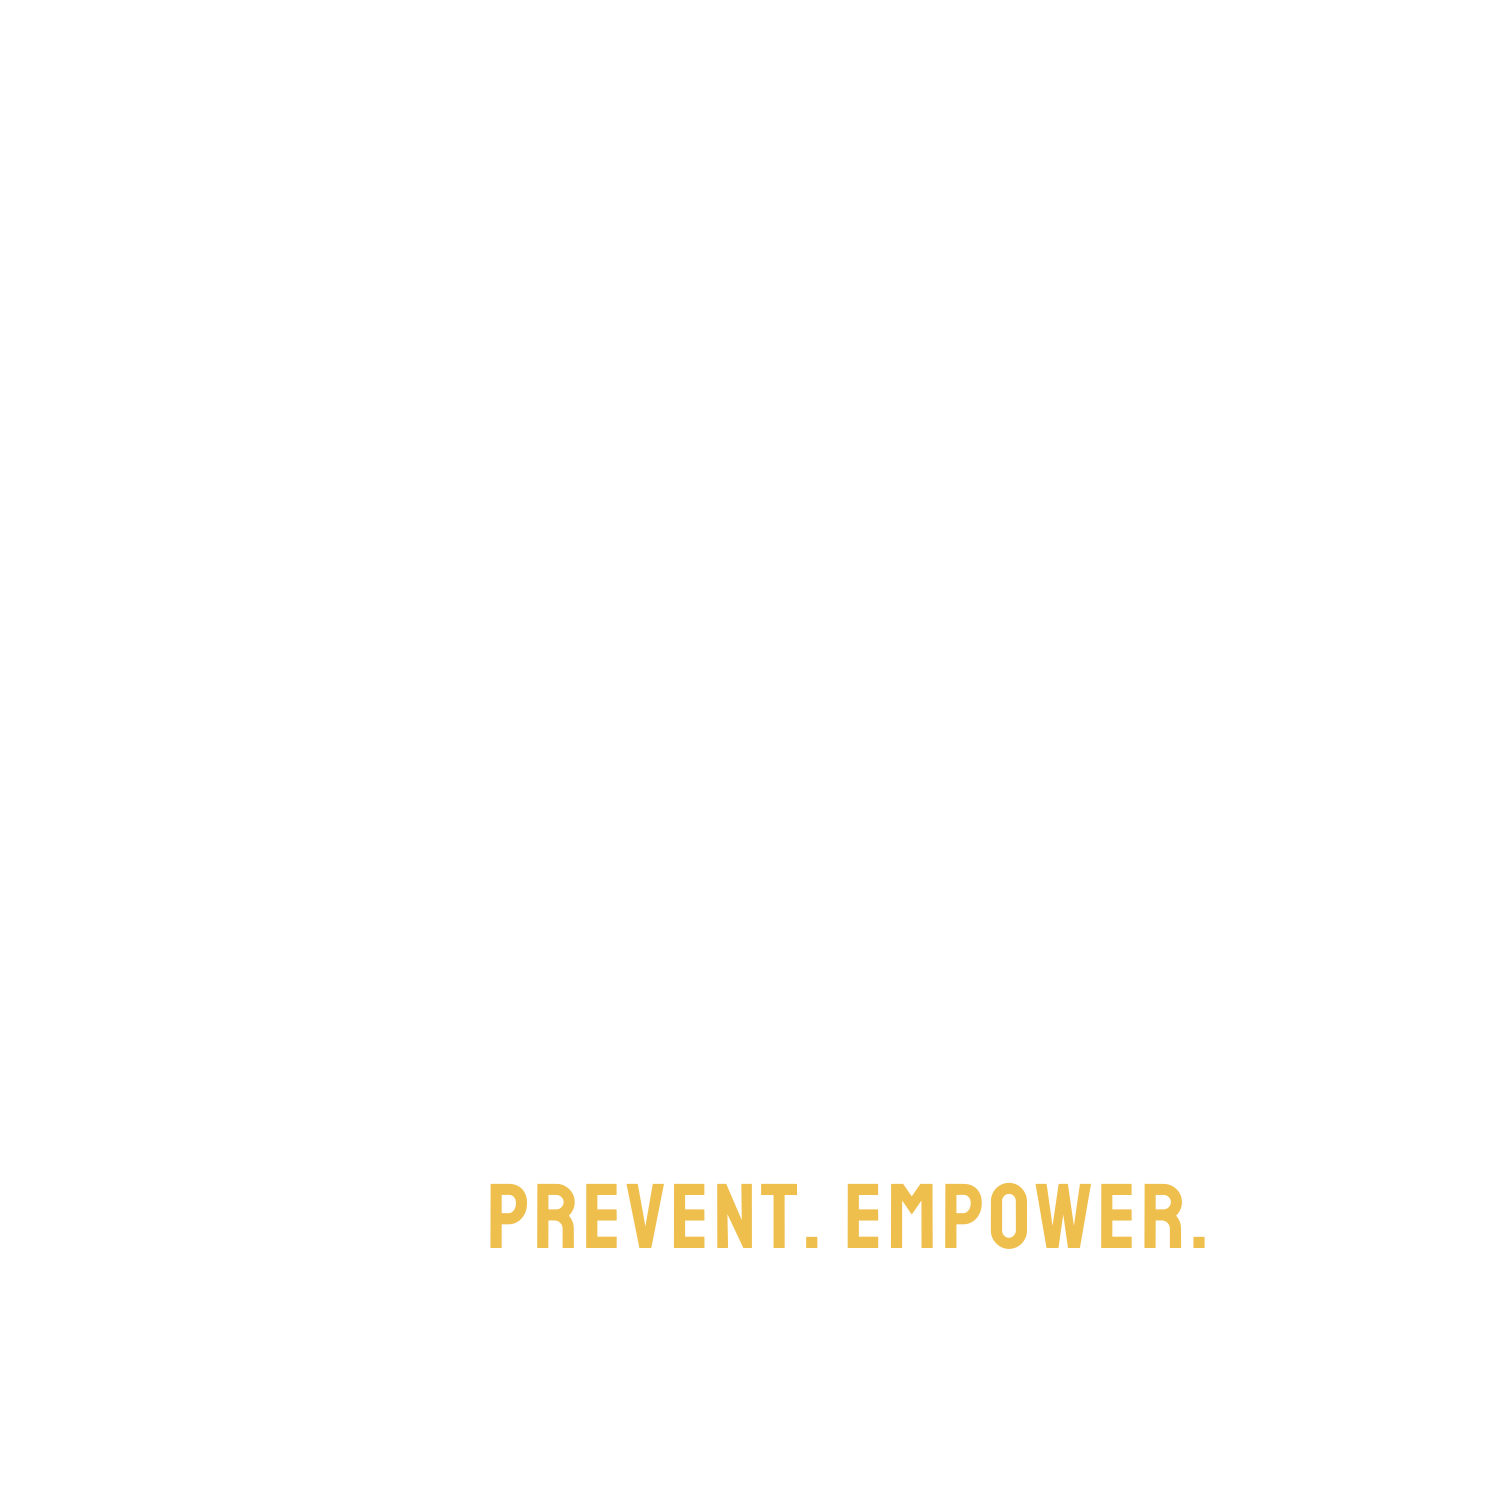 Second Nature Wilderness Archives - BREAKING CODE SILENCE